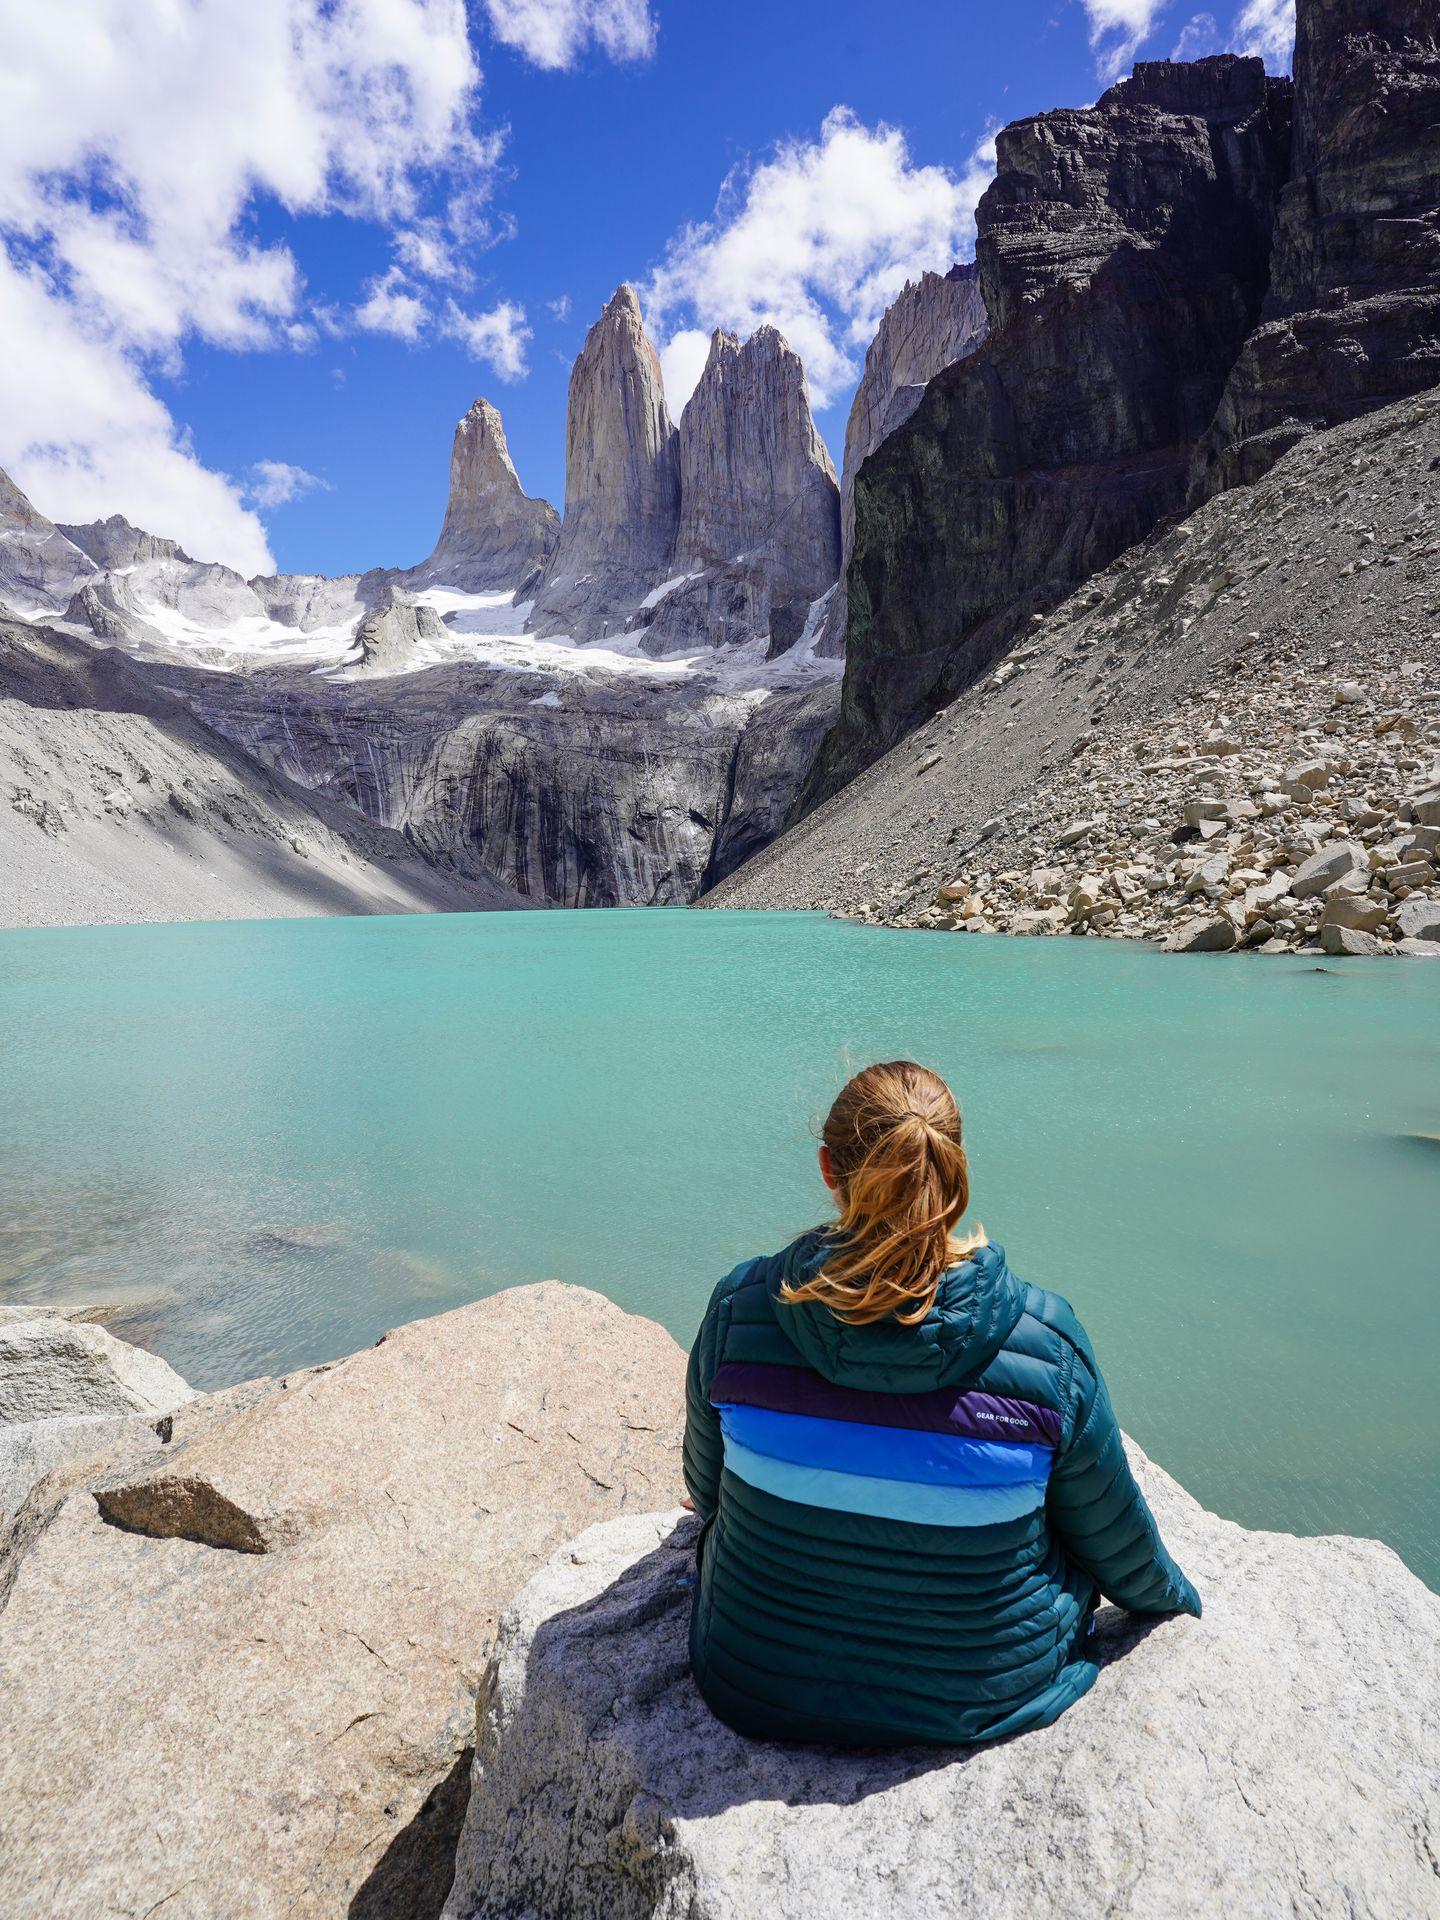 Lydia sitting on a rock and looking out at the Towers, 3 mountain peaks in Torres Del Paine National Park.